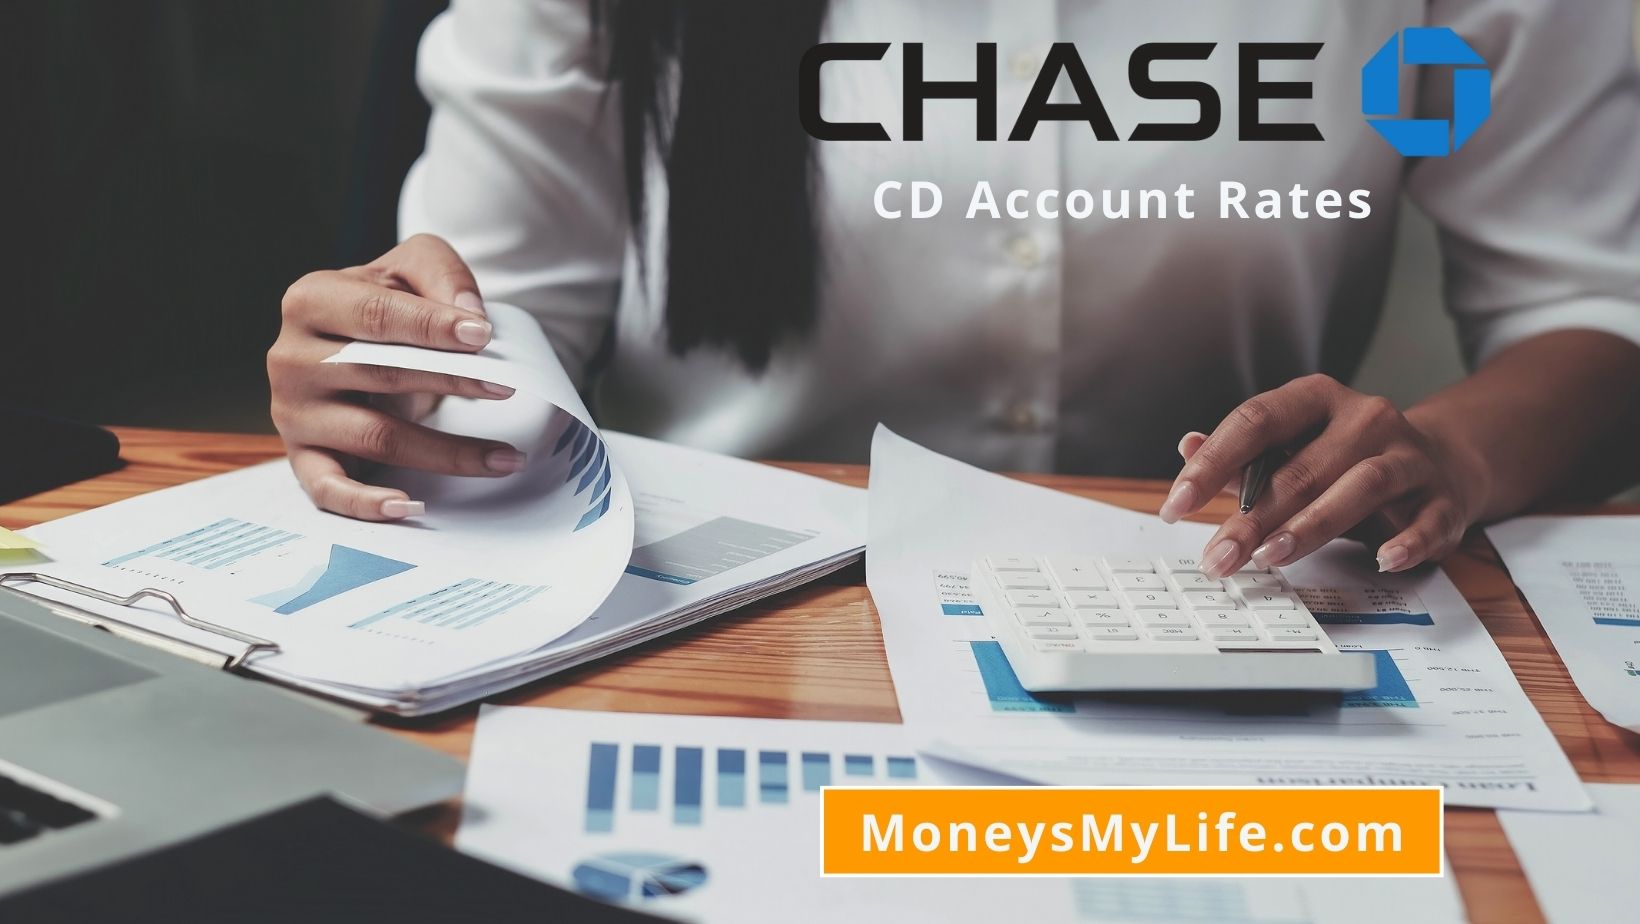 How Chase Bank CD Account Rates Compare 4.50 APY 2 Month CD Available